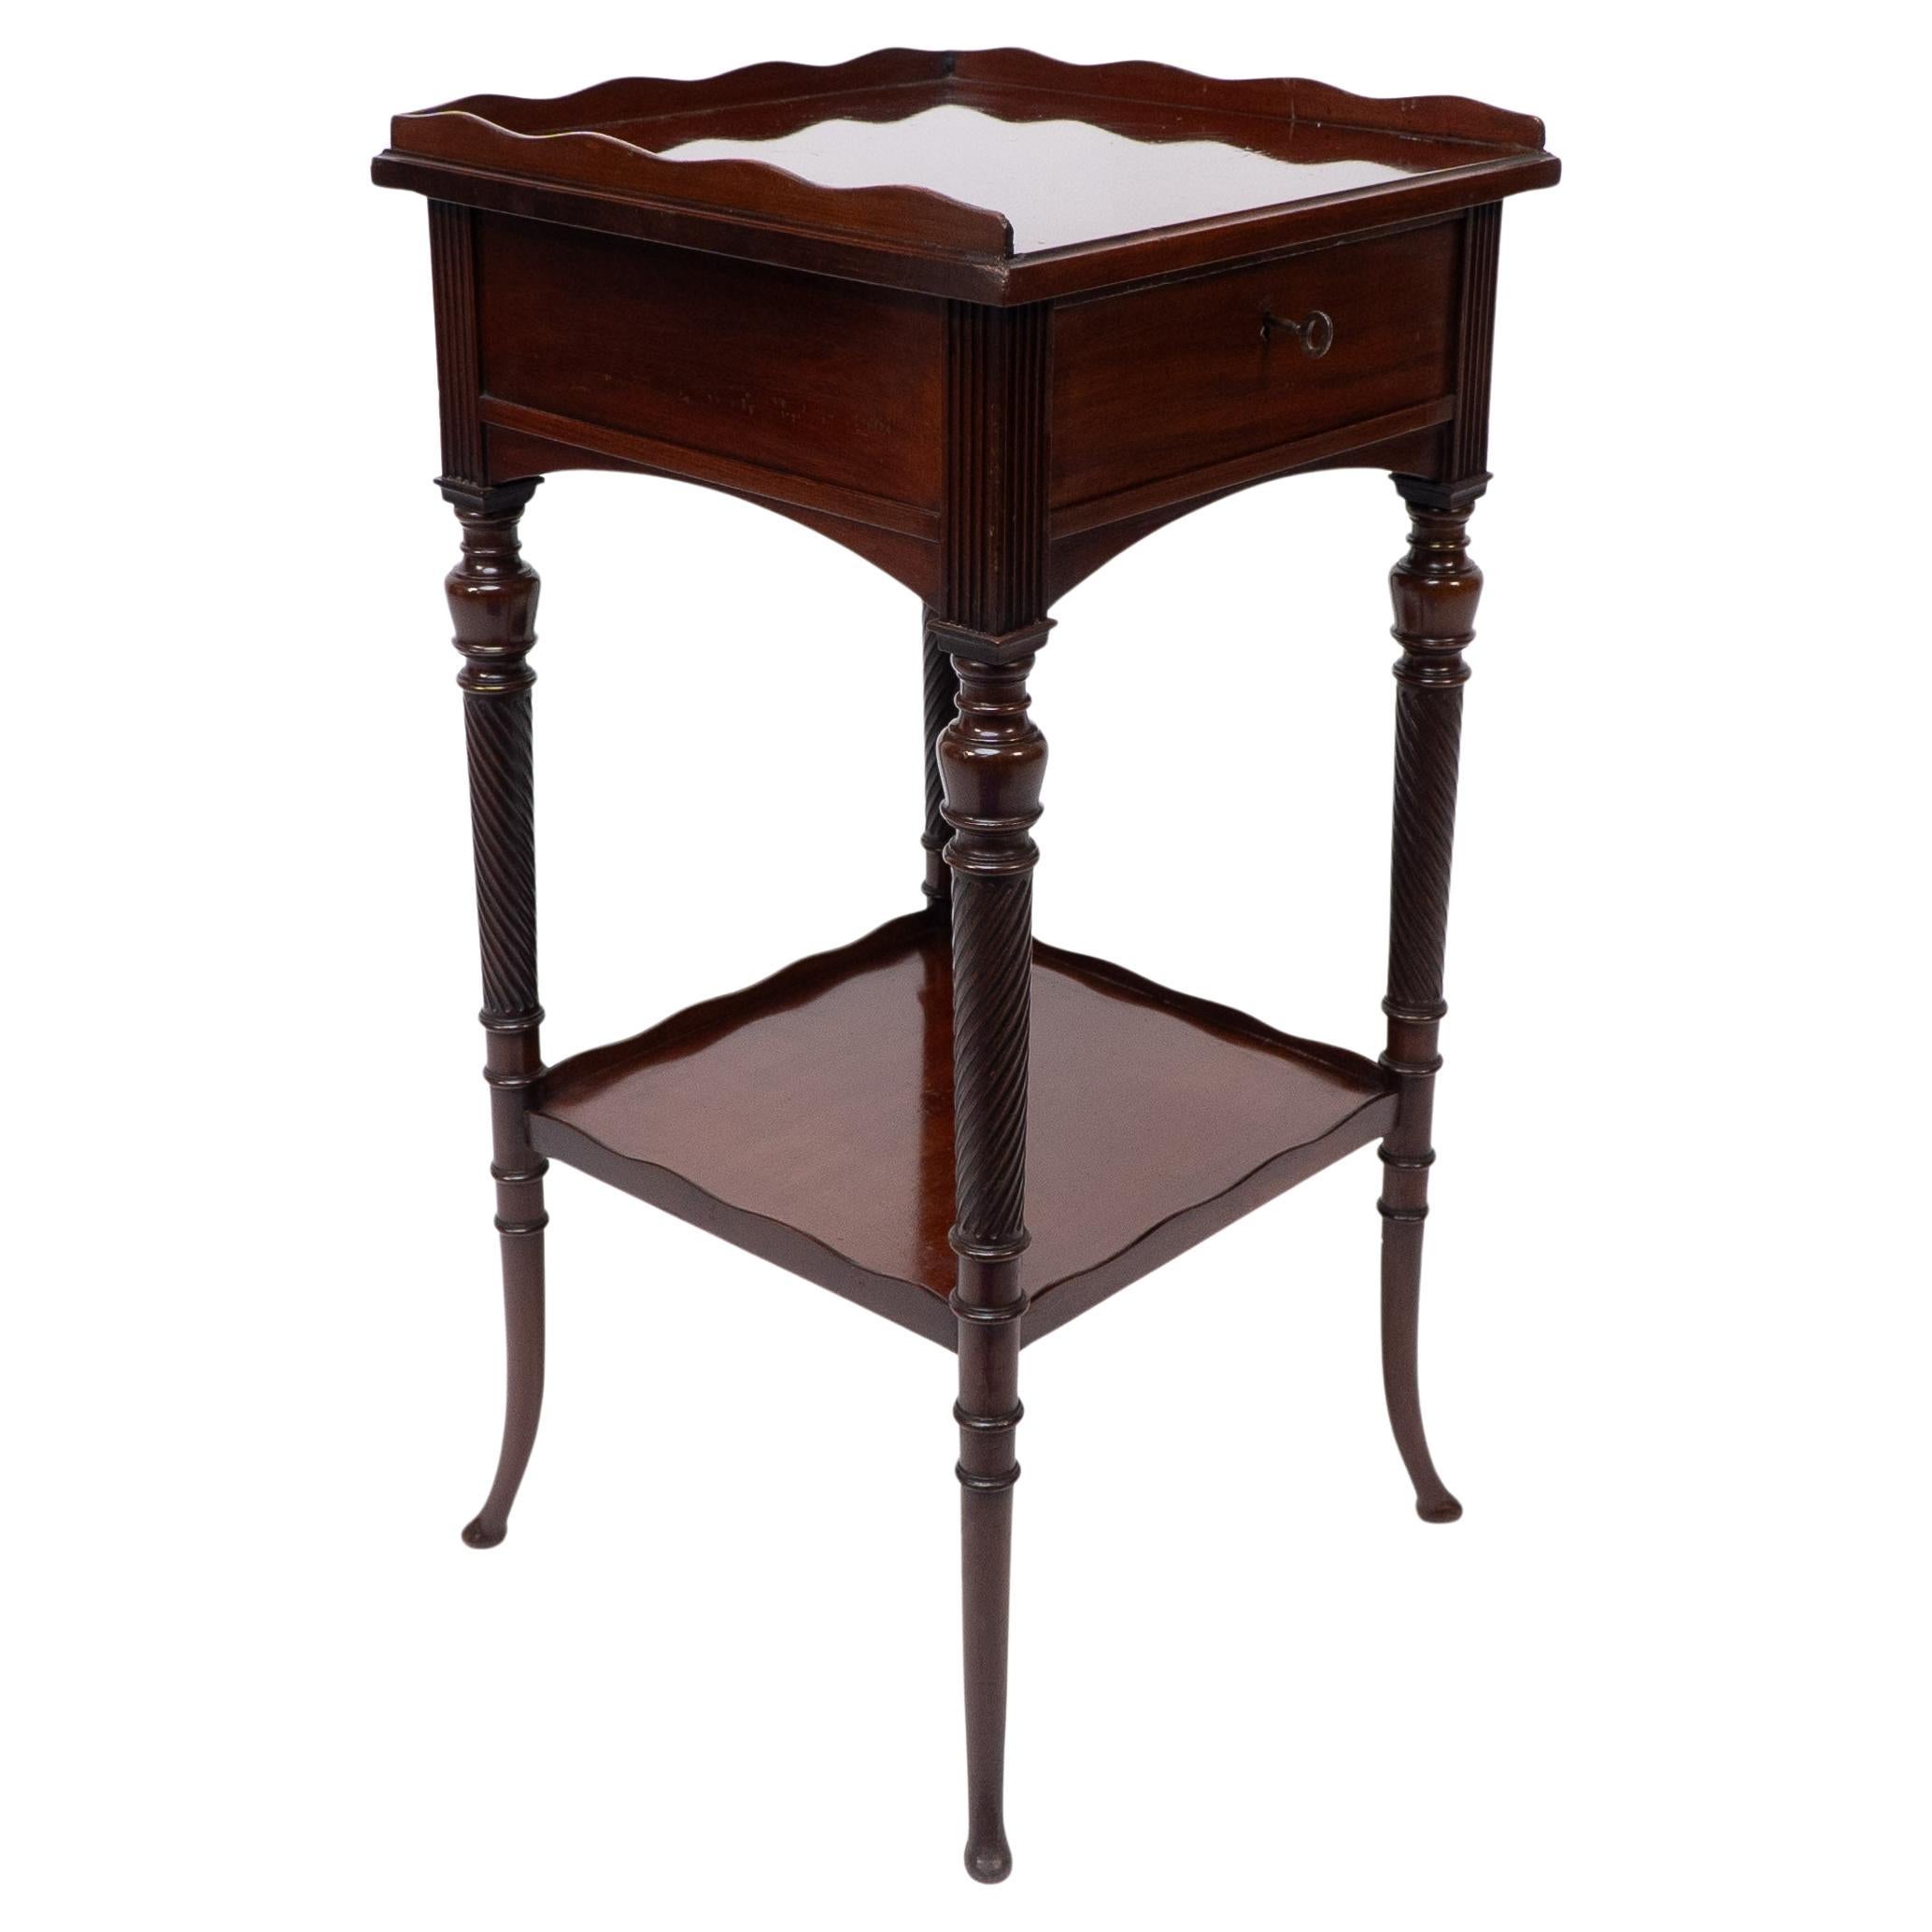 E W Godwin attr, for Collinson & Lock. An Aesthetic Movement mahogany side table For Sale